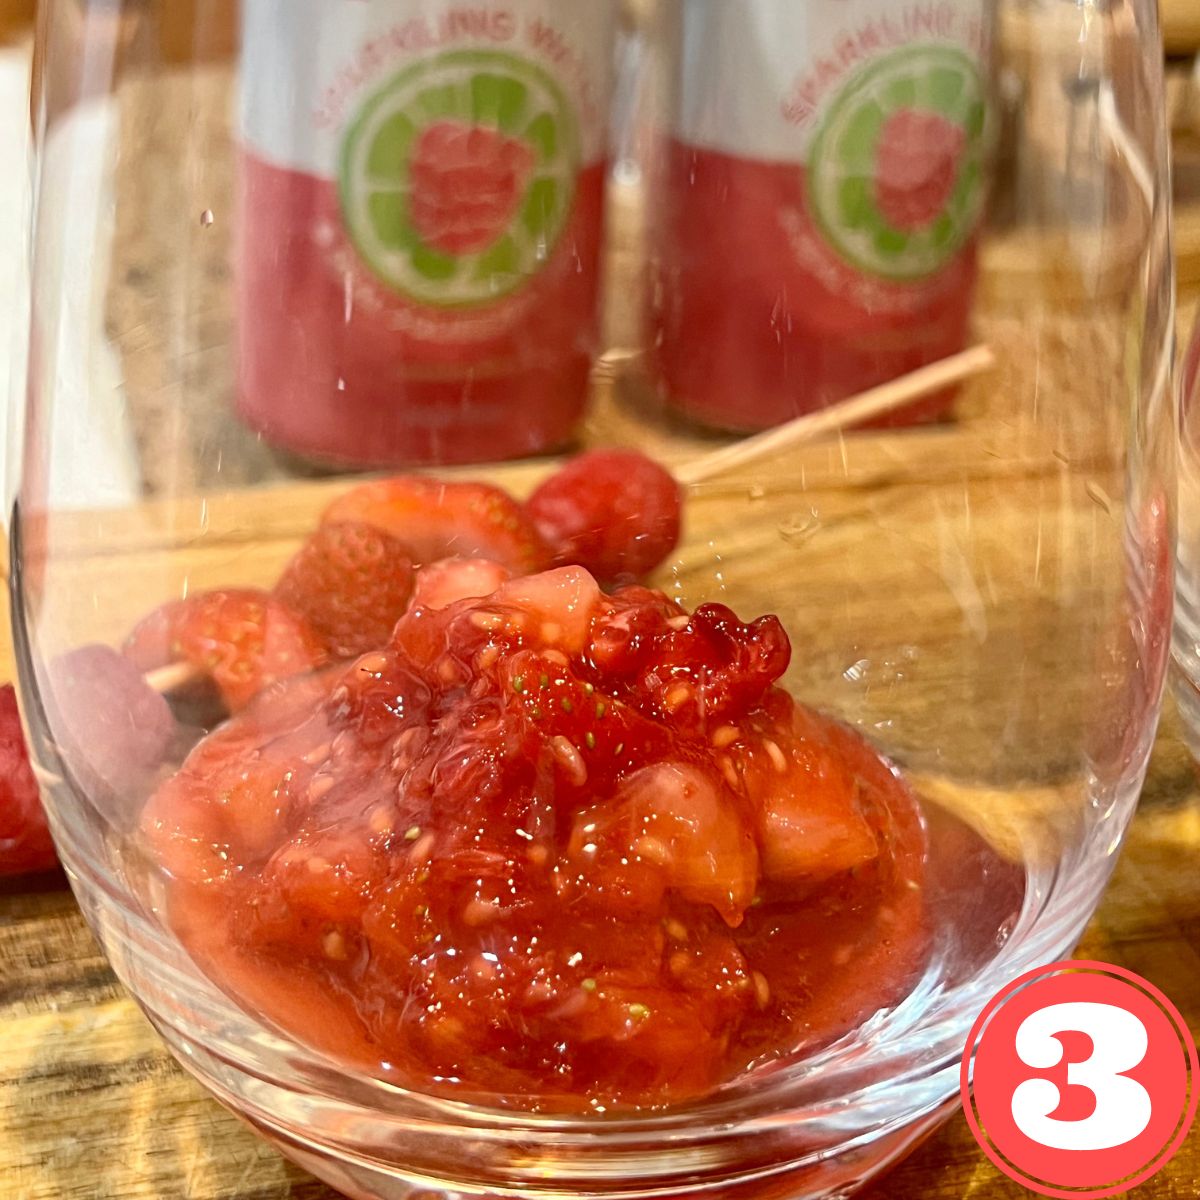 A wine glass with smashed strawberries and raspberries on the bottom